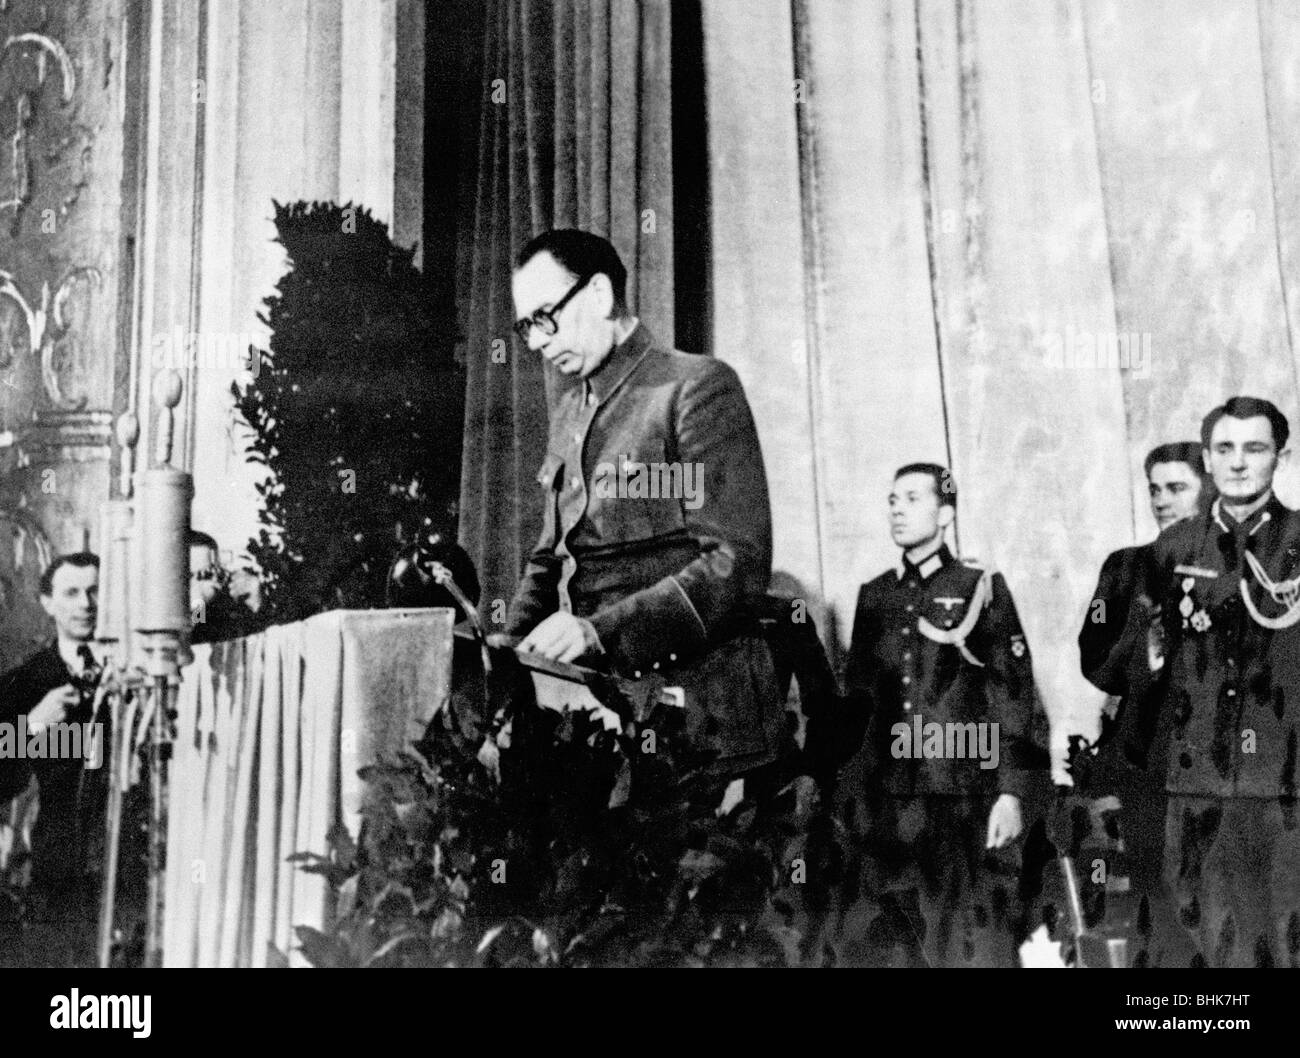 Vlasov, Andrei Andreyevich, 1.9.1900 - 2.8.1946, Russian general, during 'Prague Manifesto' of the 'Committee for the Liberation of the Peoples of Russia', Prague, 14.11.1944, , Stock Photo